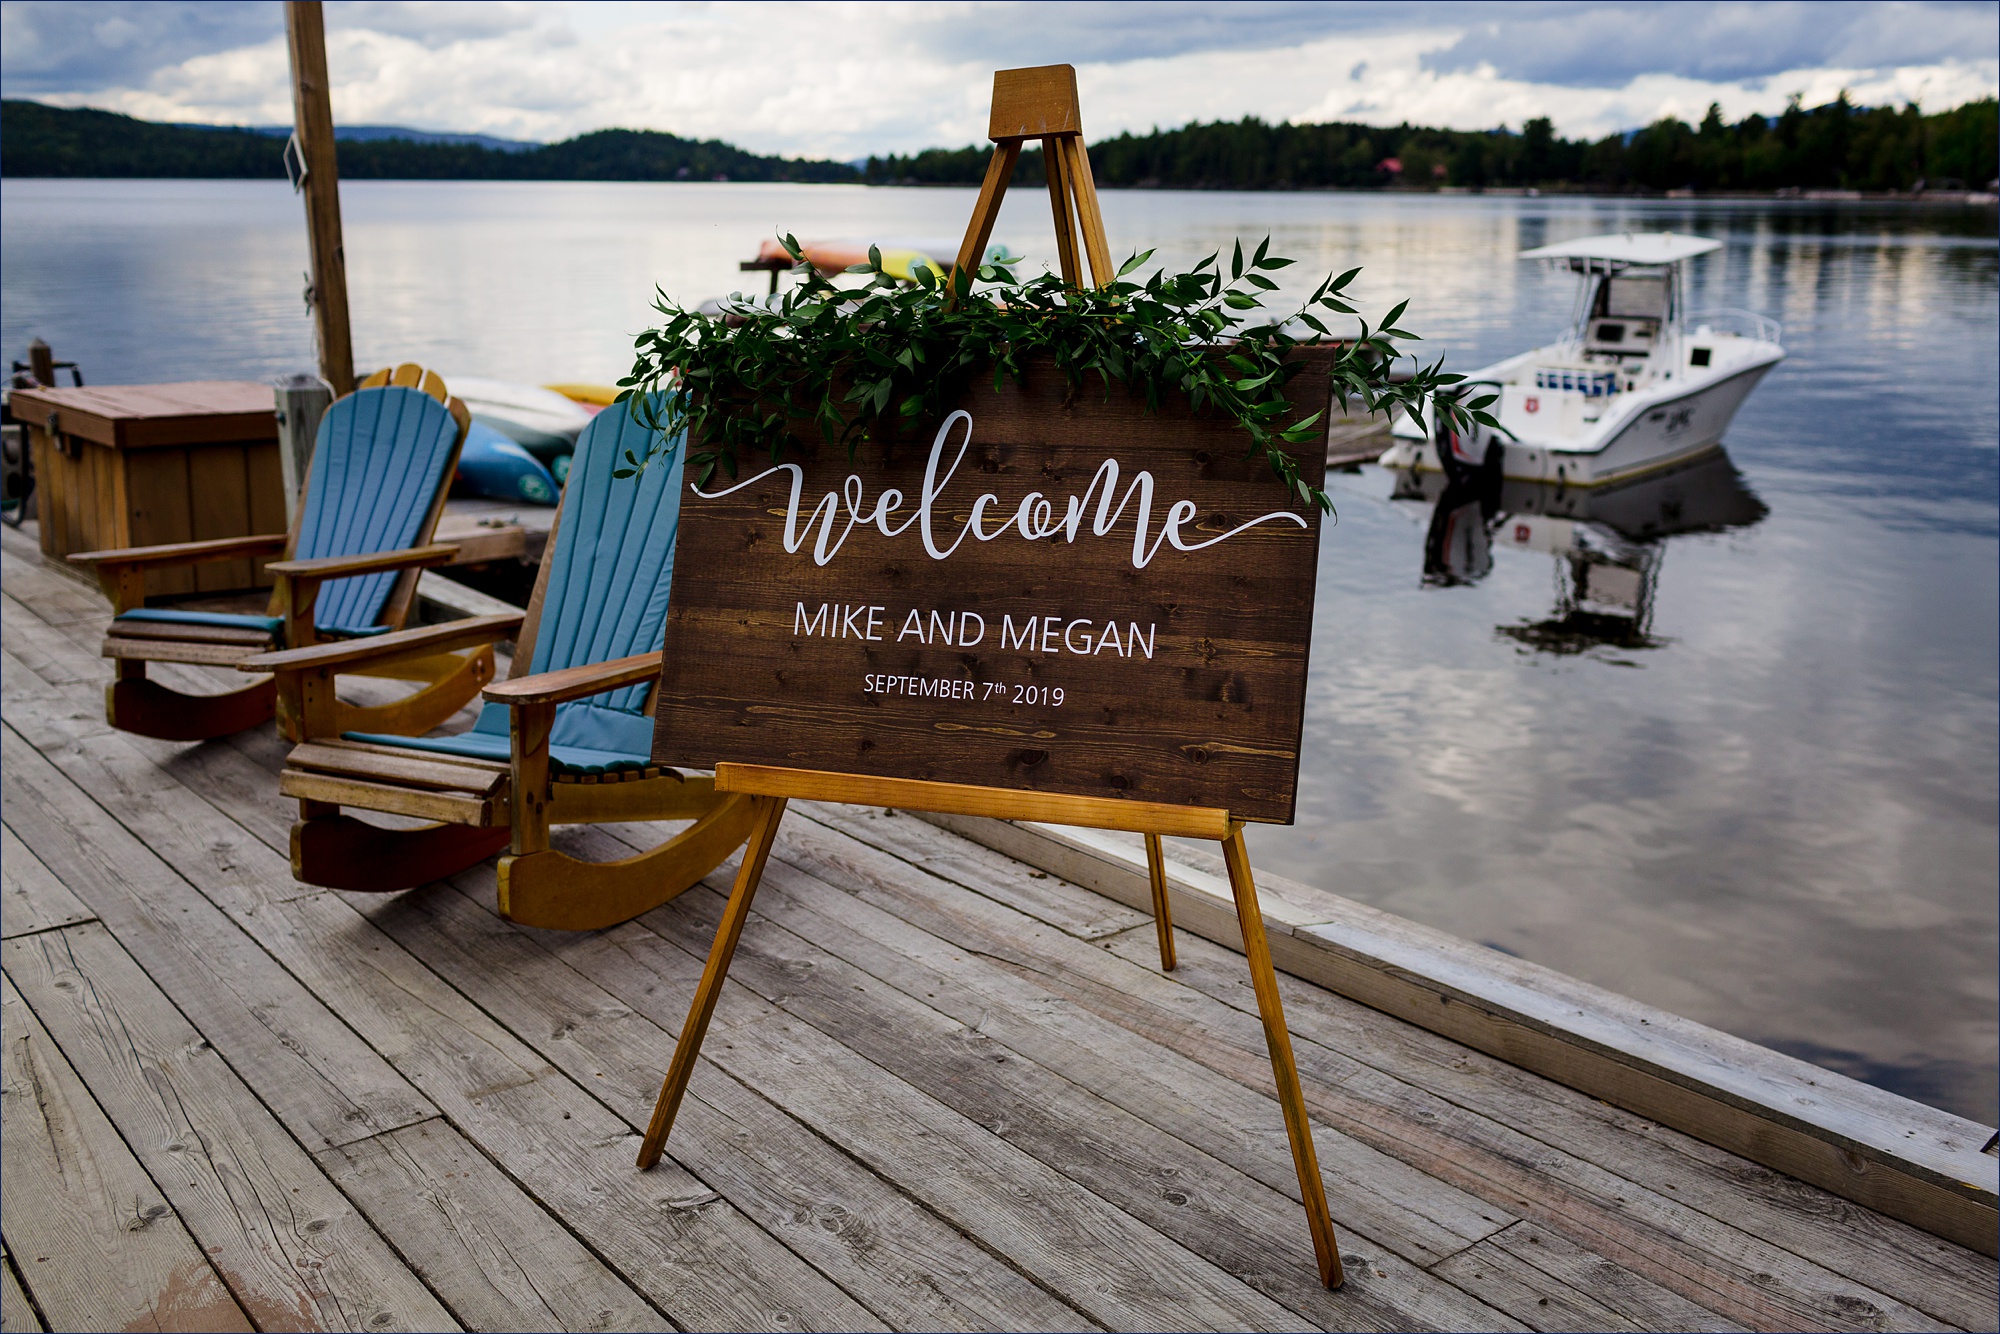 Signs greet guests to the wedding on a dock